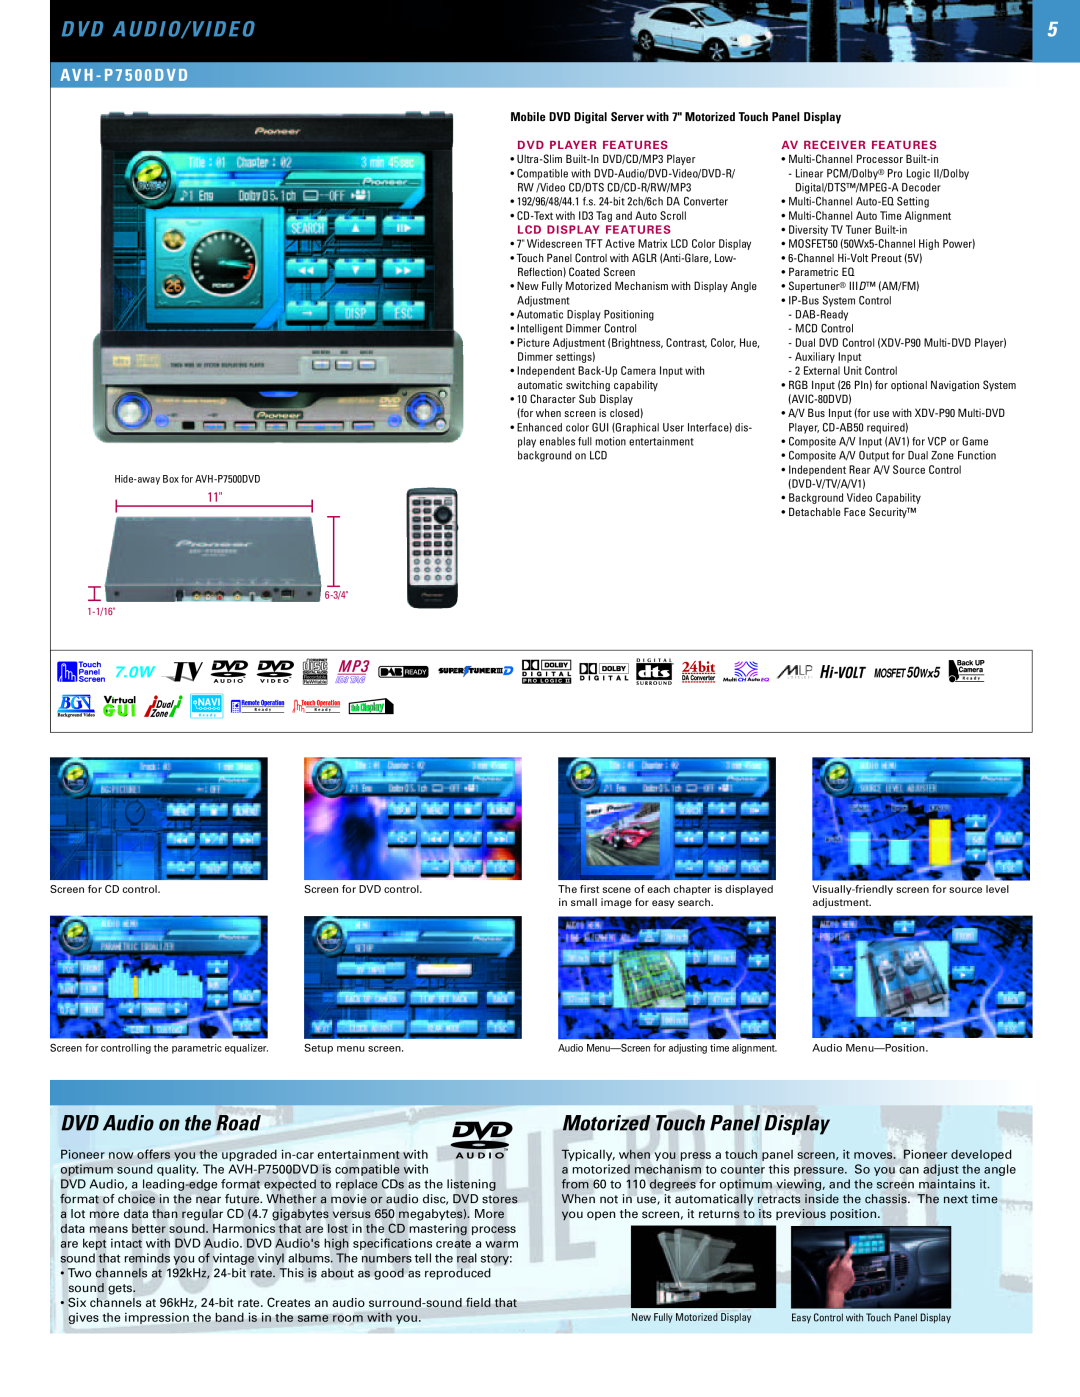 SUPER MICRO Computer 2004 manual D V D A U D I O / V I D E O, DVD Audio on the Road, Motorized Touch Panel Display, 7.0W 